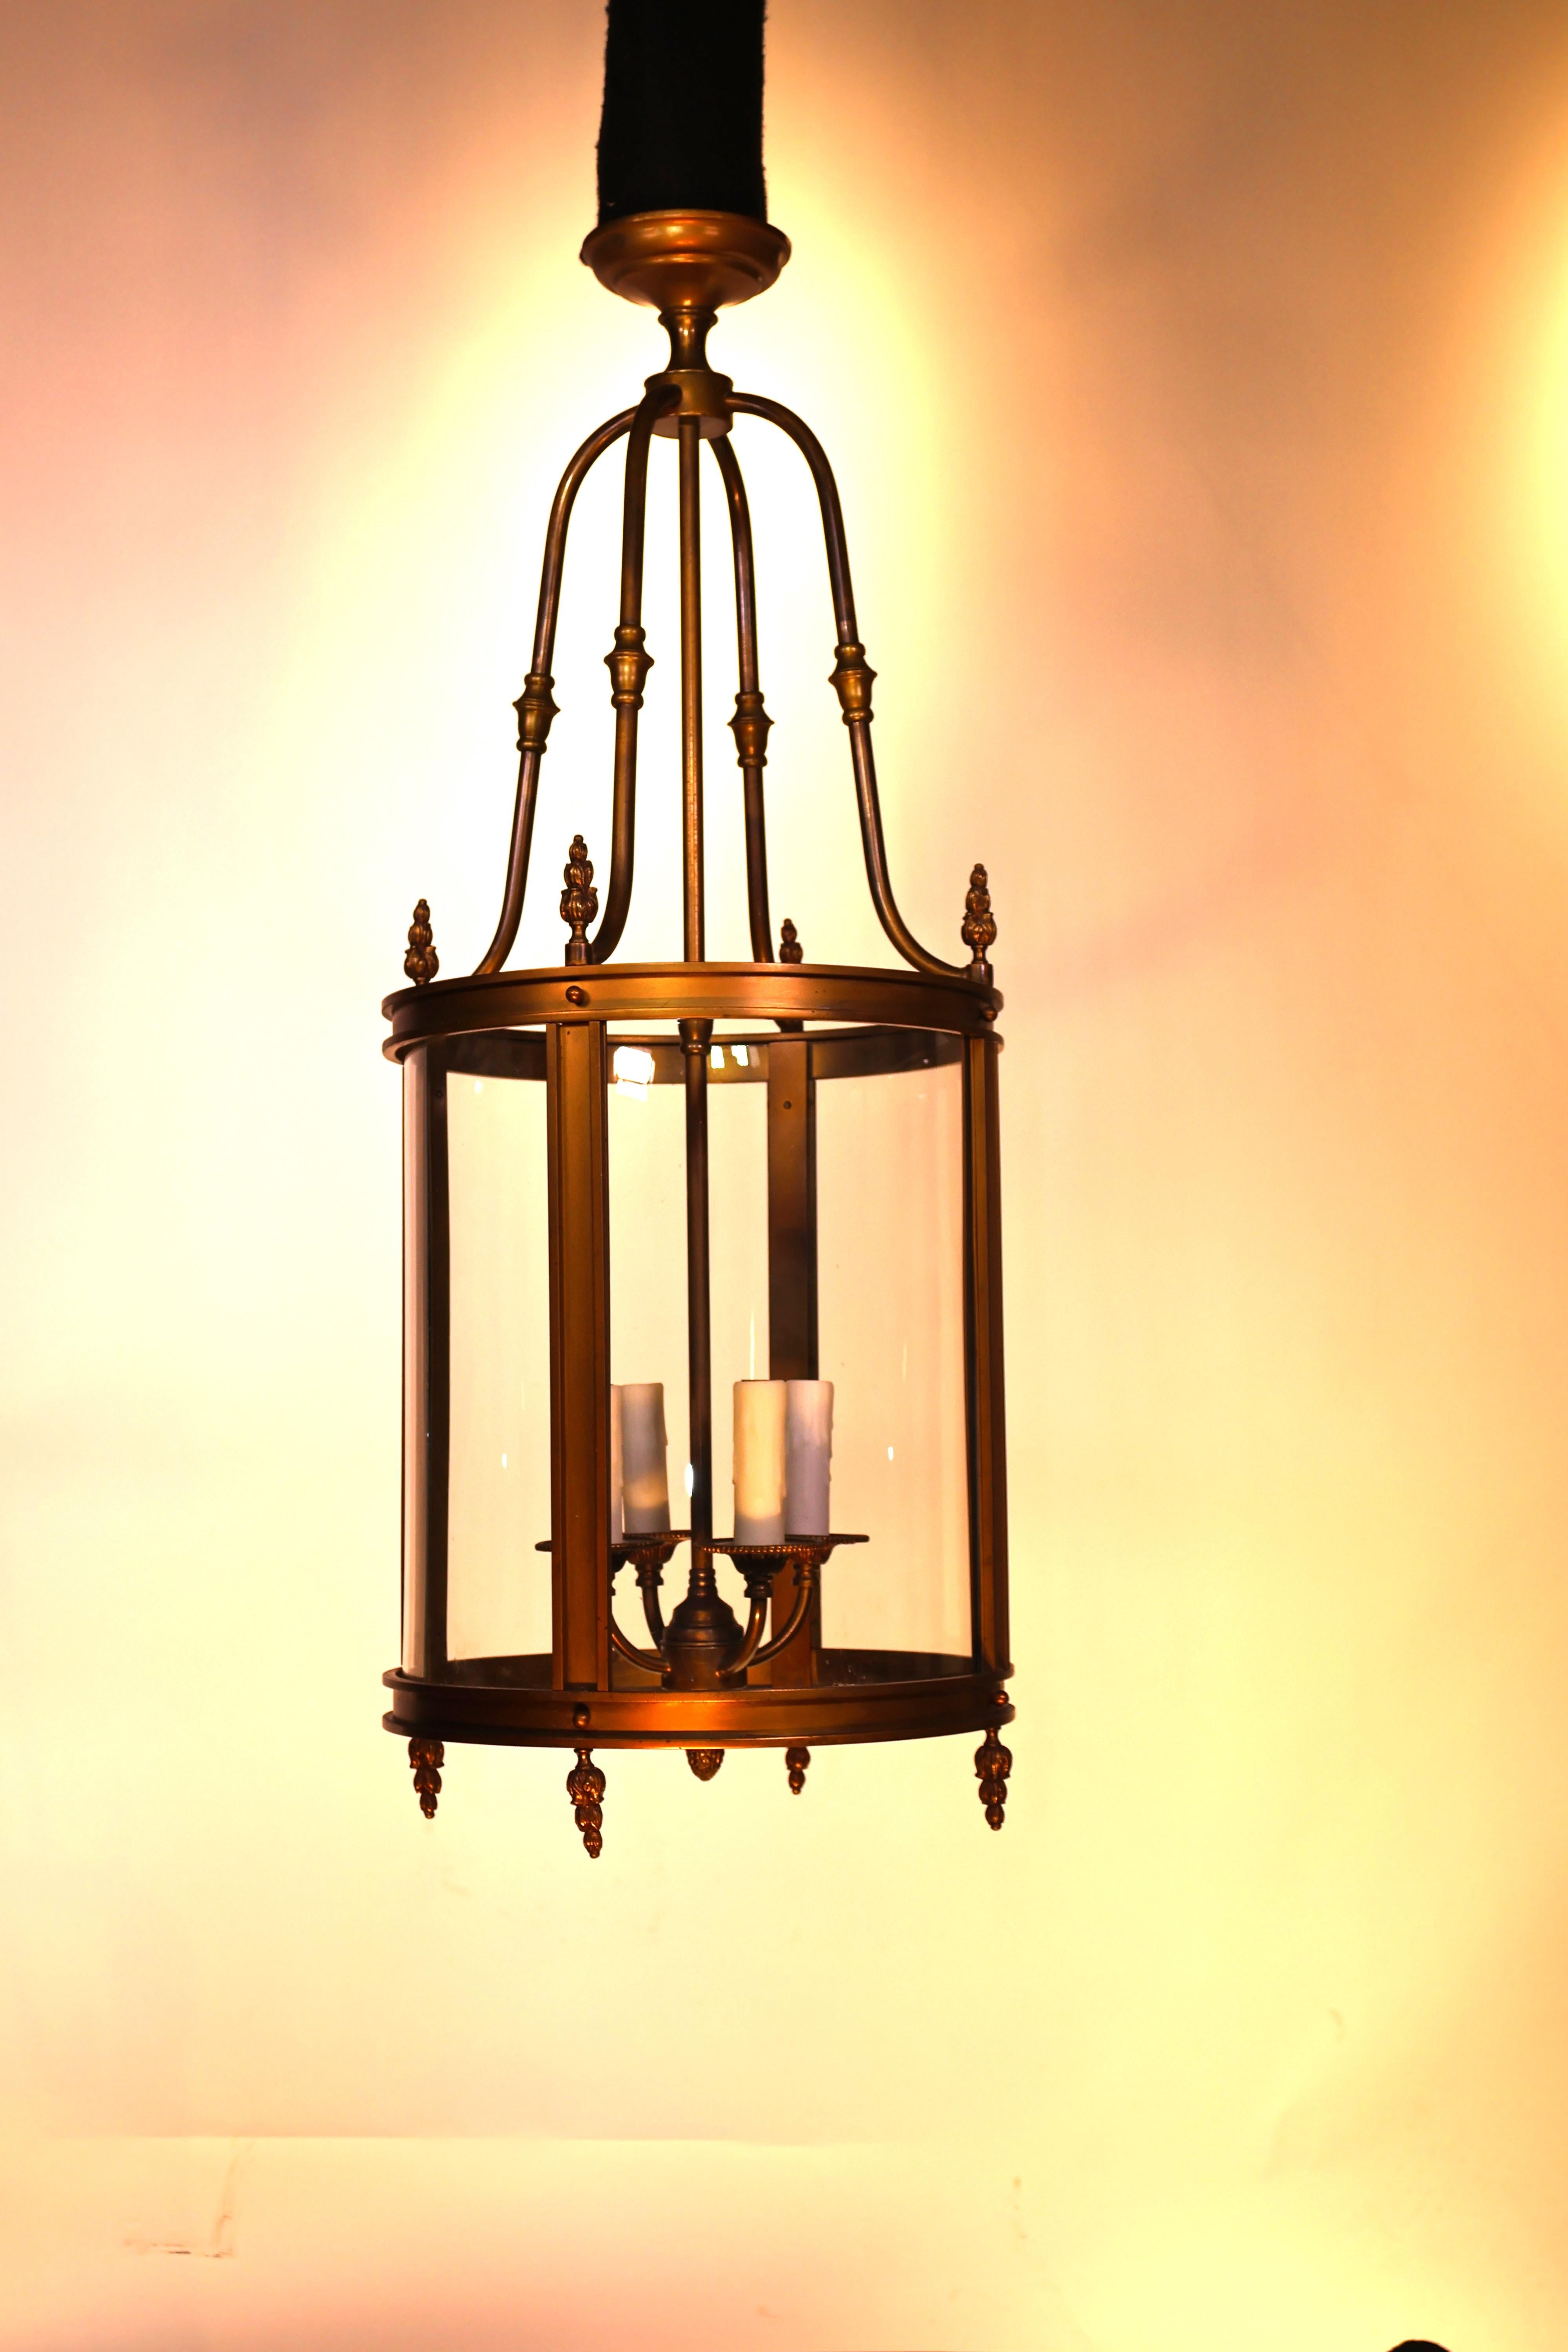 Mid-20th Century Neoclassical Lantern For Sale